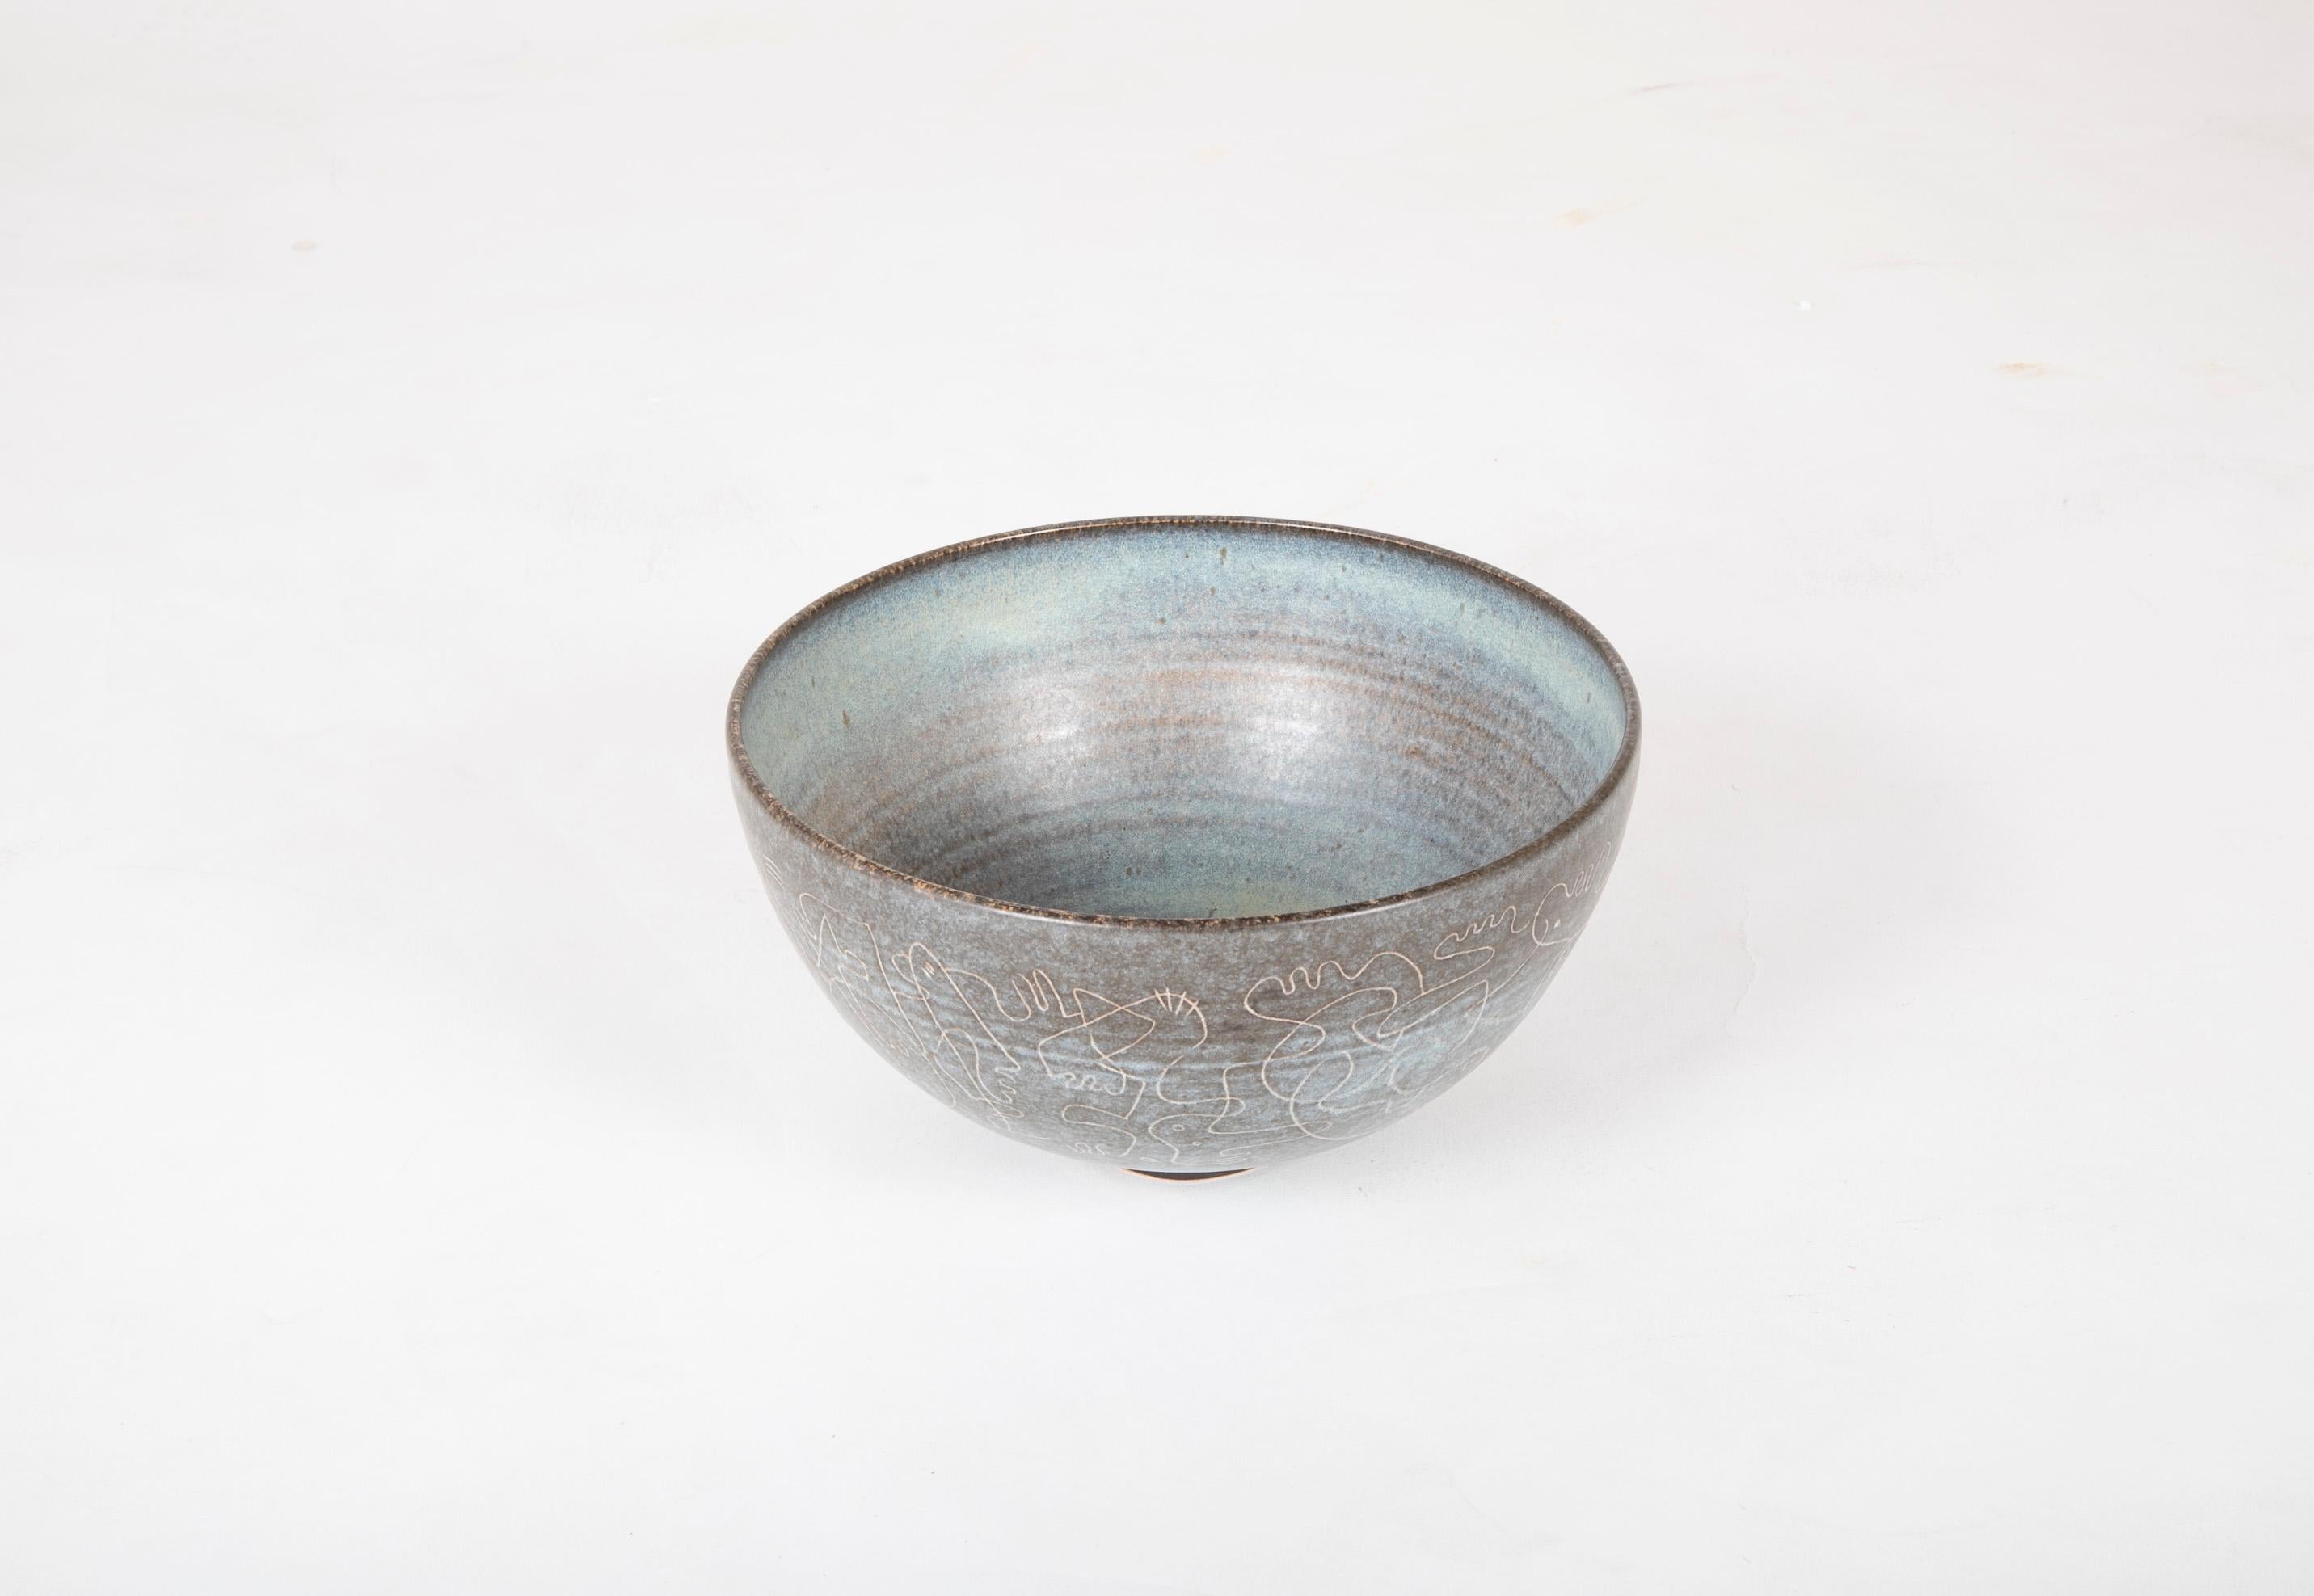 A blue and grey glazed stoneware bowl with scrafito decoration most likely from the late 1950s or early 1960s. Signed 